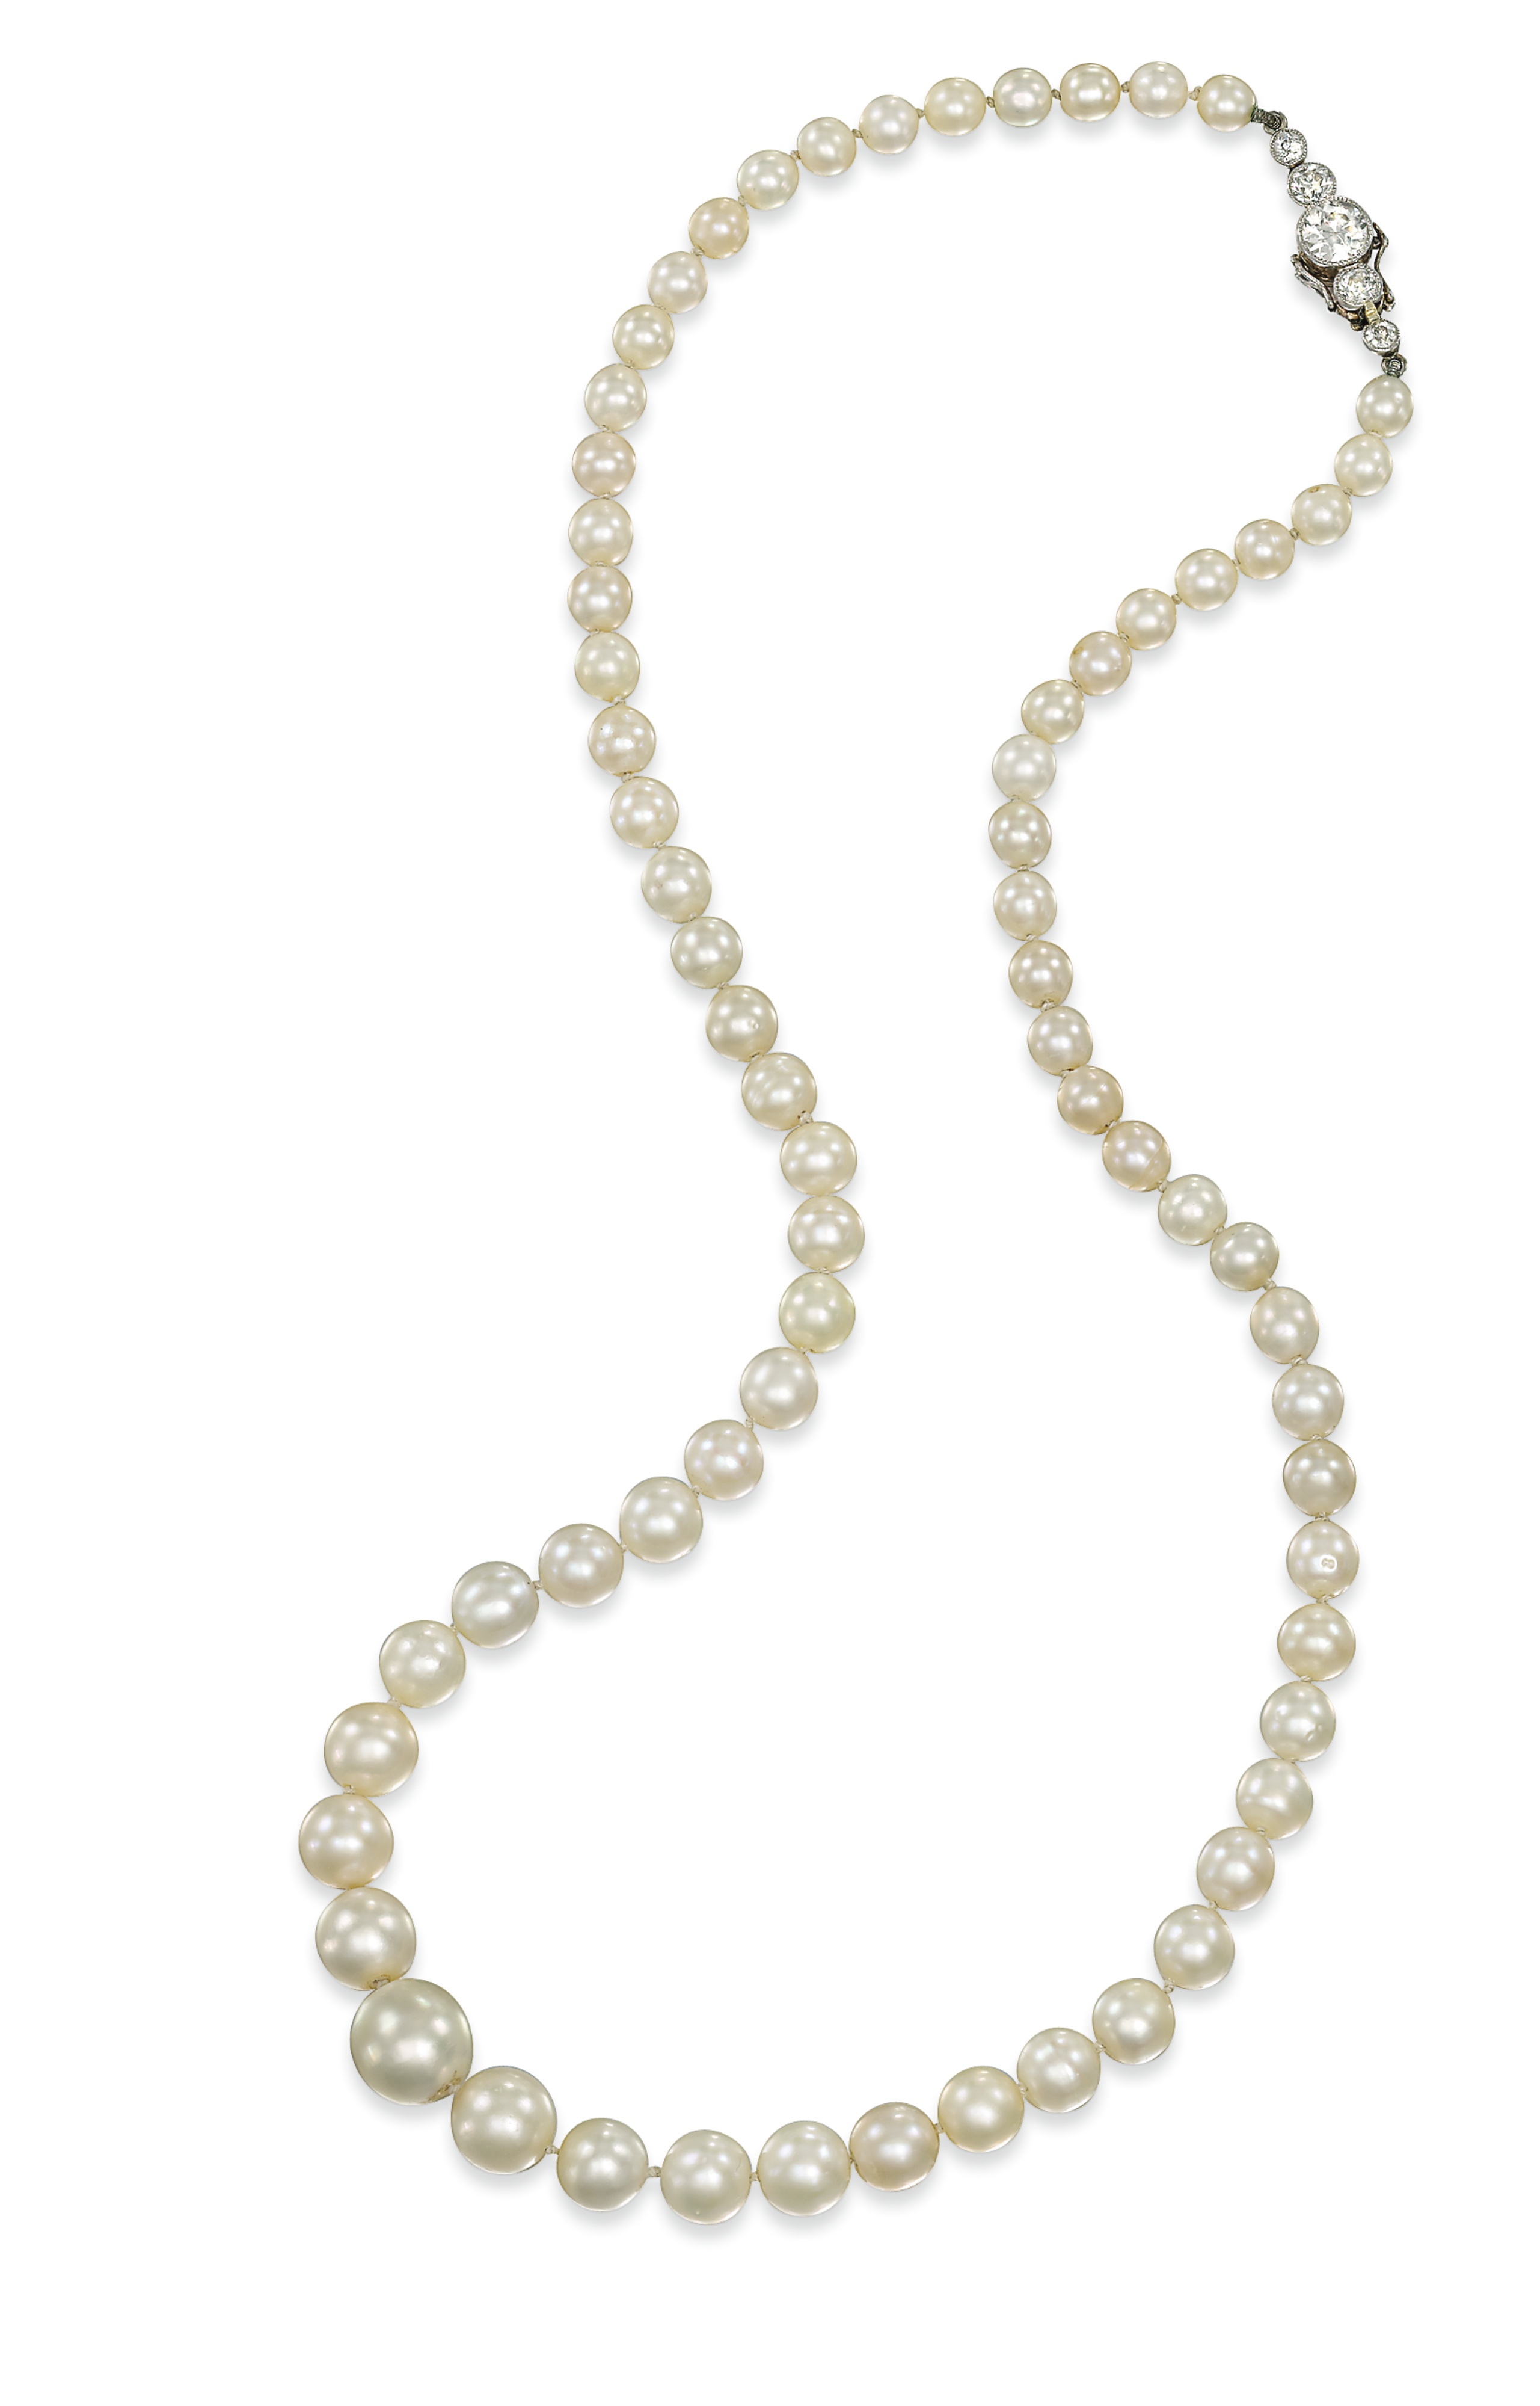 String Of Pearls Clipart Border Pearl Border   Viewing Gallery